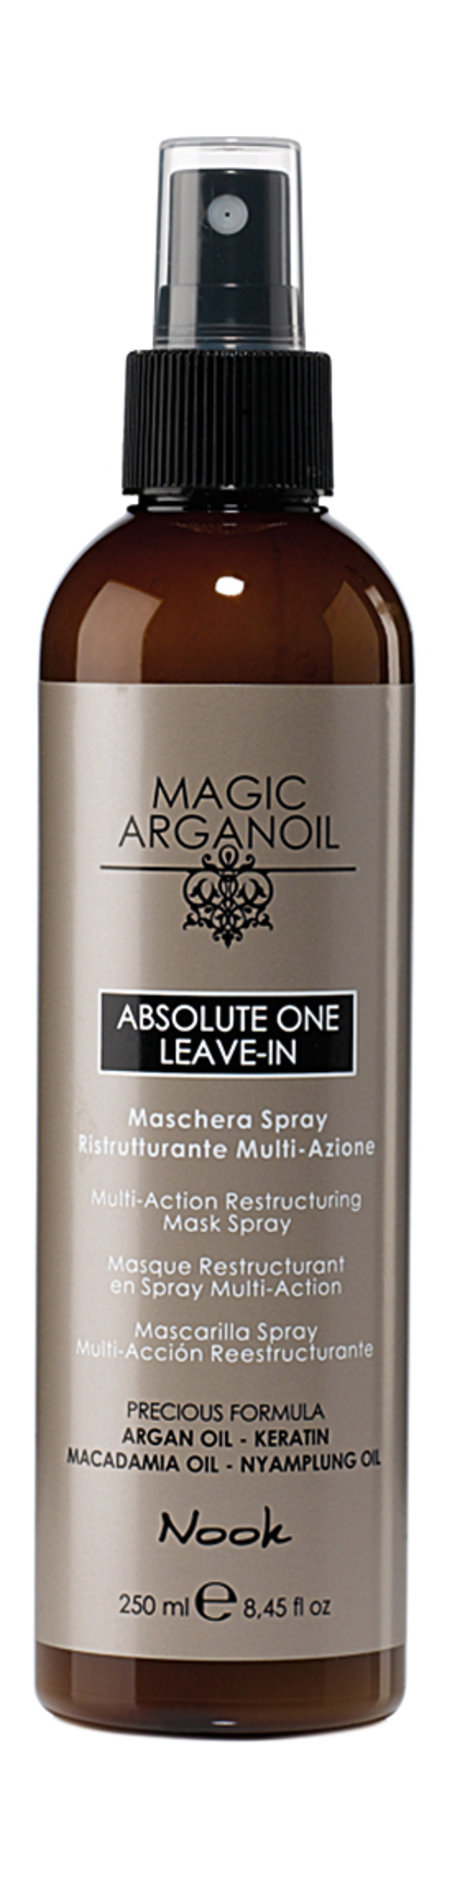 nook magic arganoil absolute one leave-in